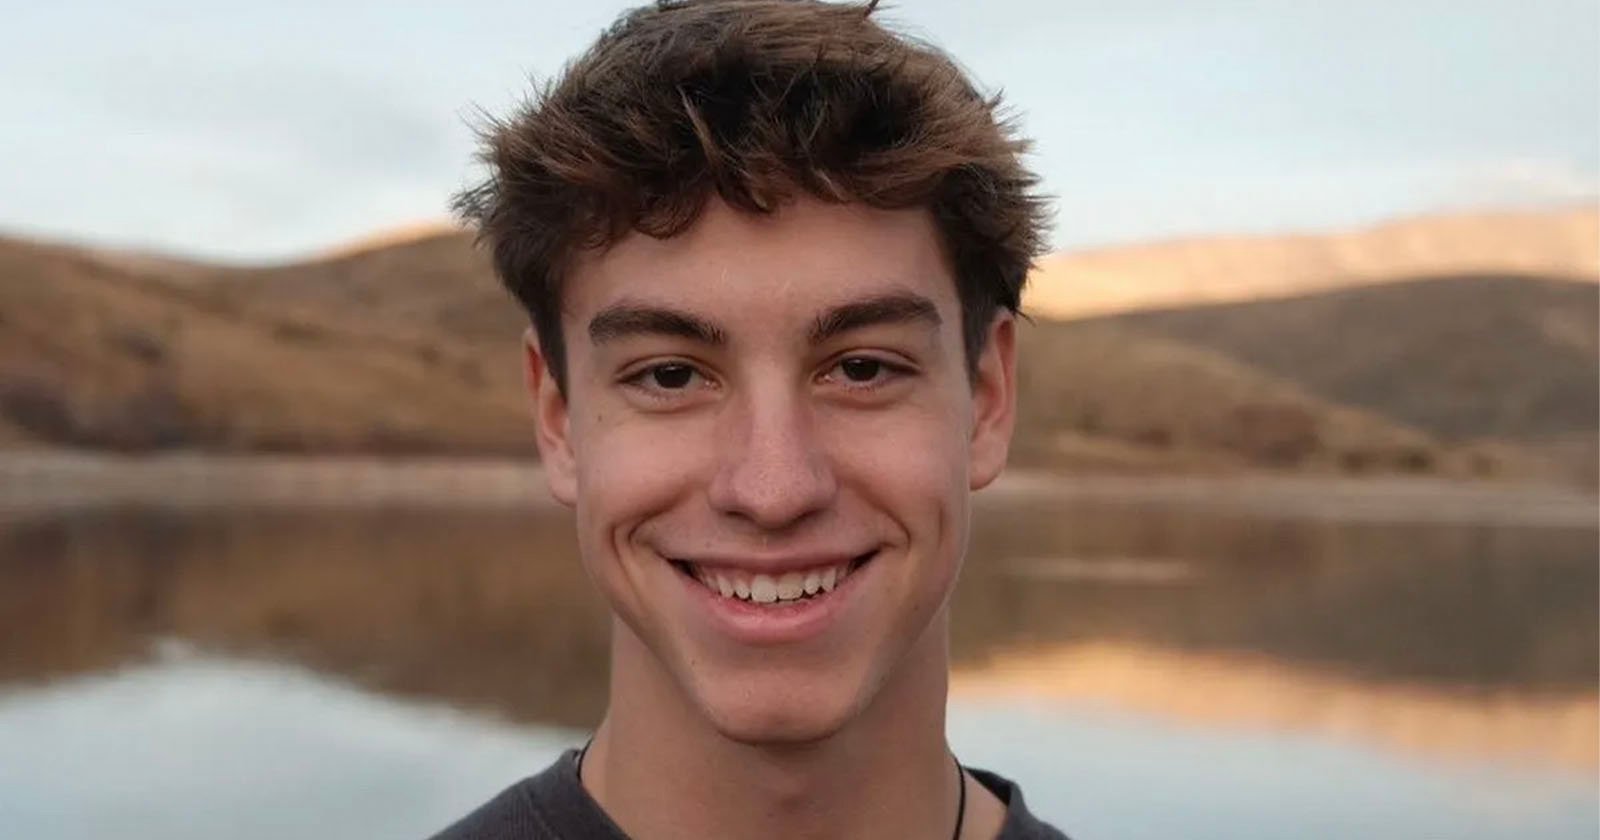 Photographer, 19, Falls to His Death While Taking Pictures of Canyon